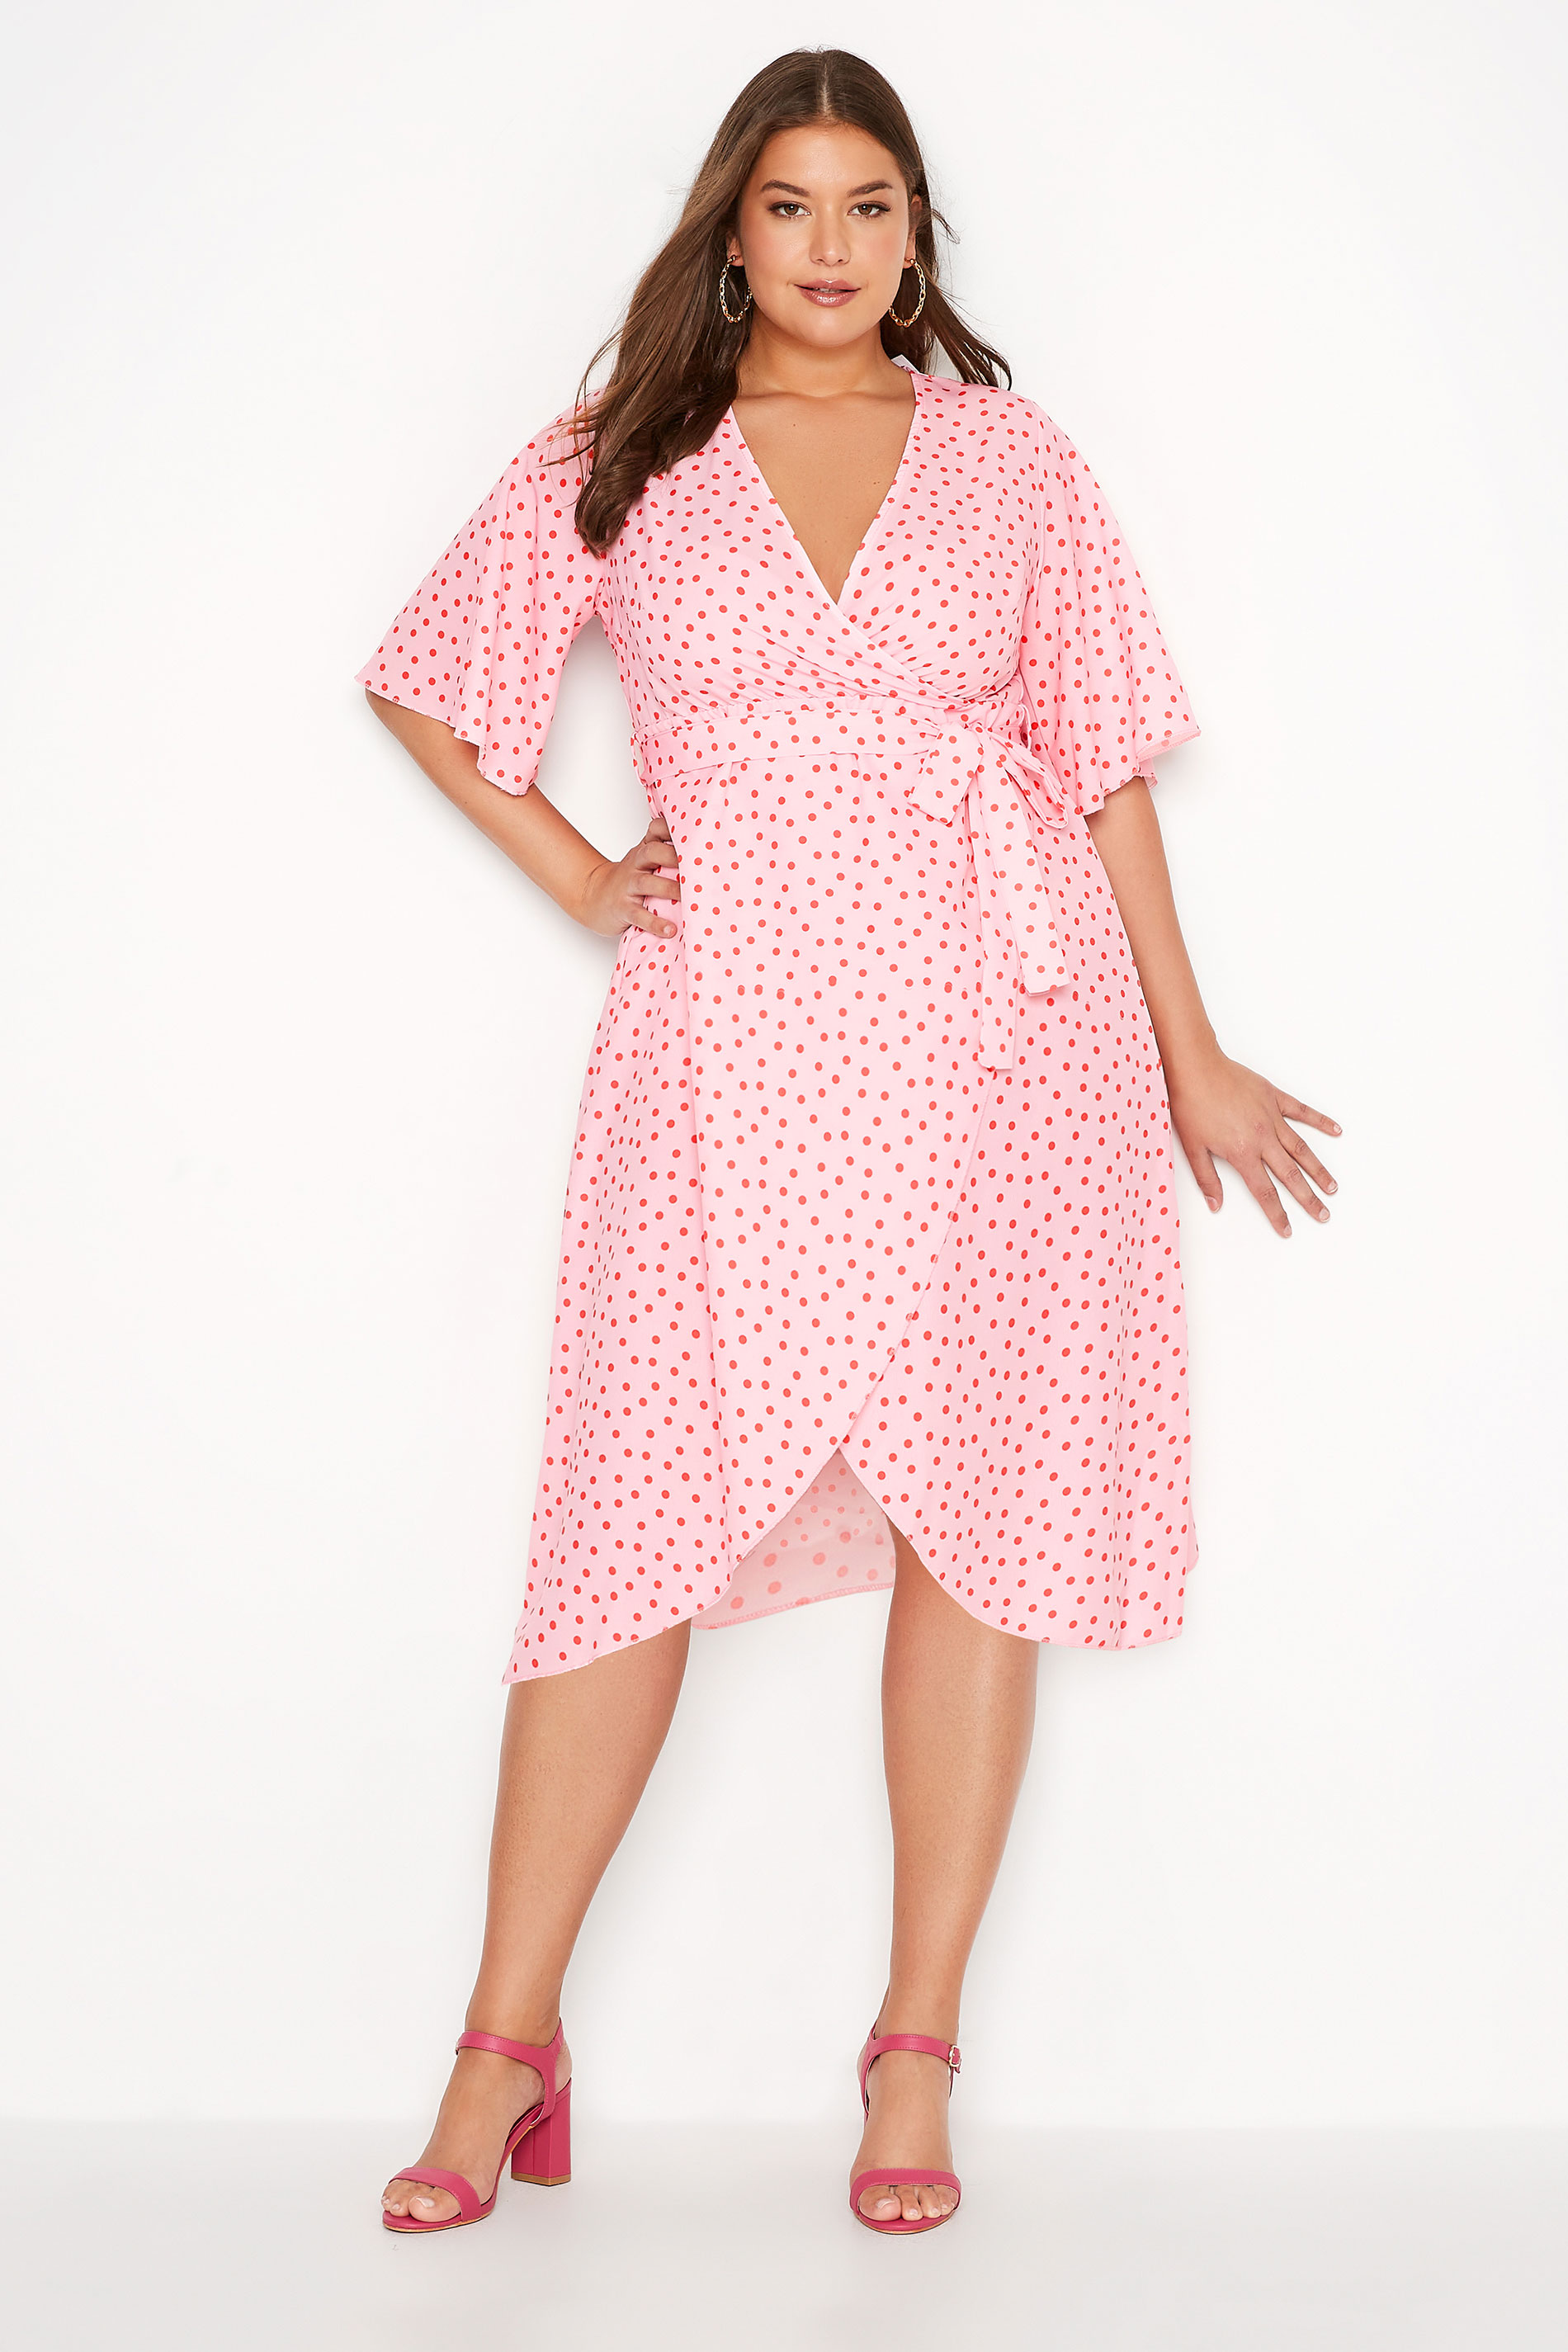 Robes Grande Taille Grande taille  Robes Portefeuilles | YOURS LONDON - Robe Rose à Pois Rouge Style Portefeuille - YK23336